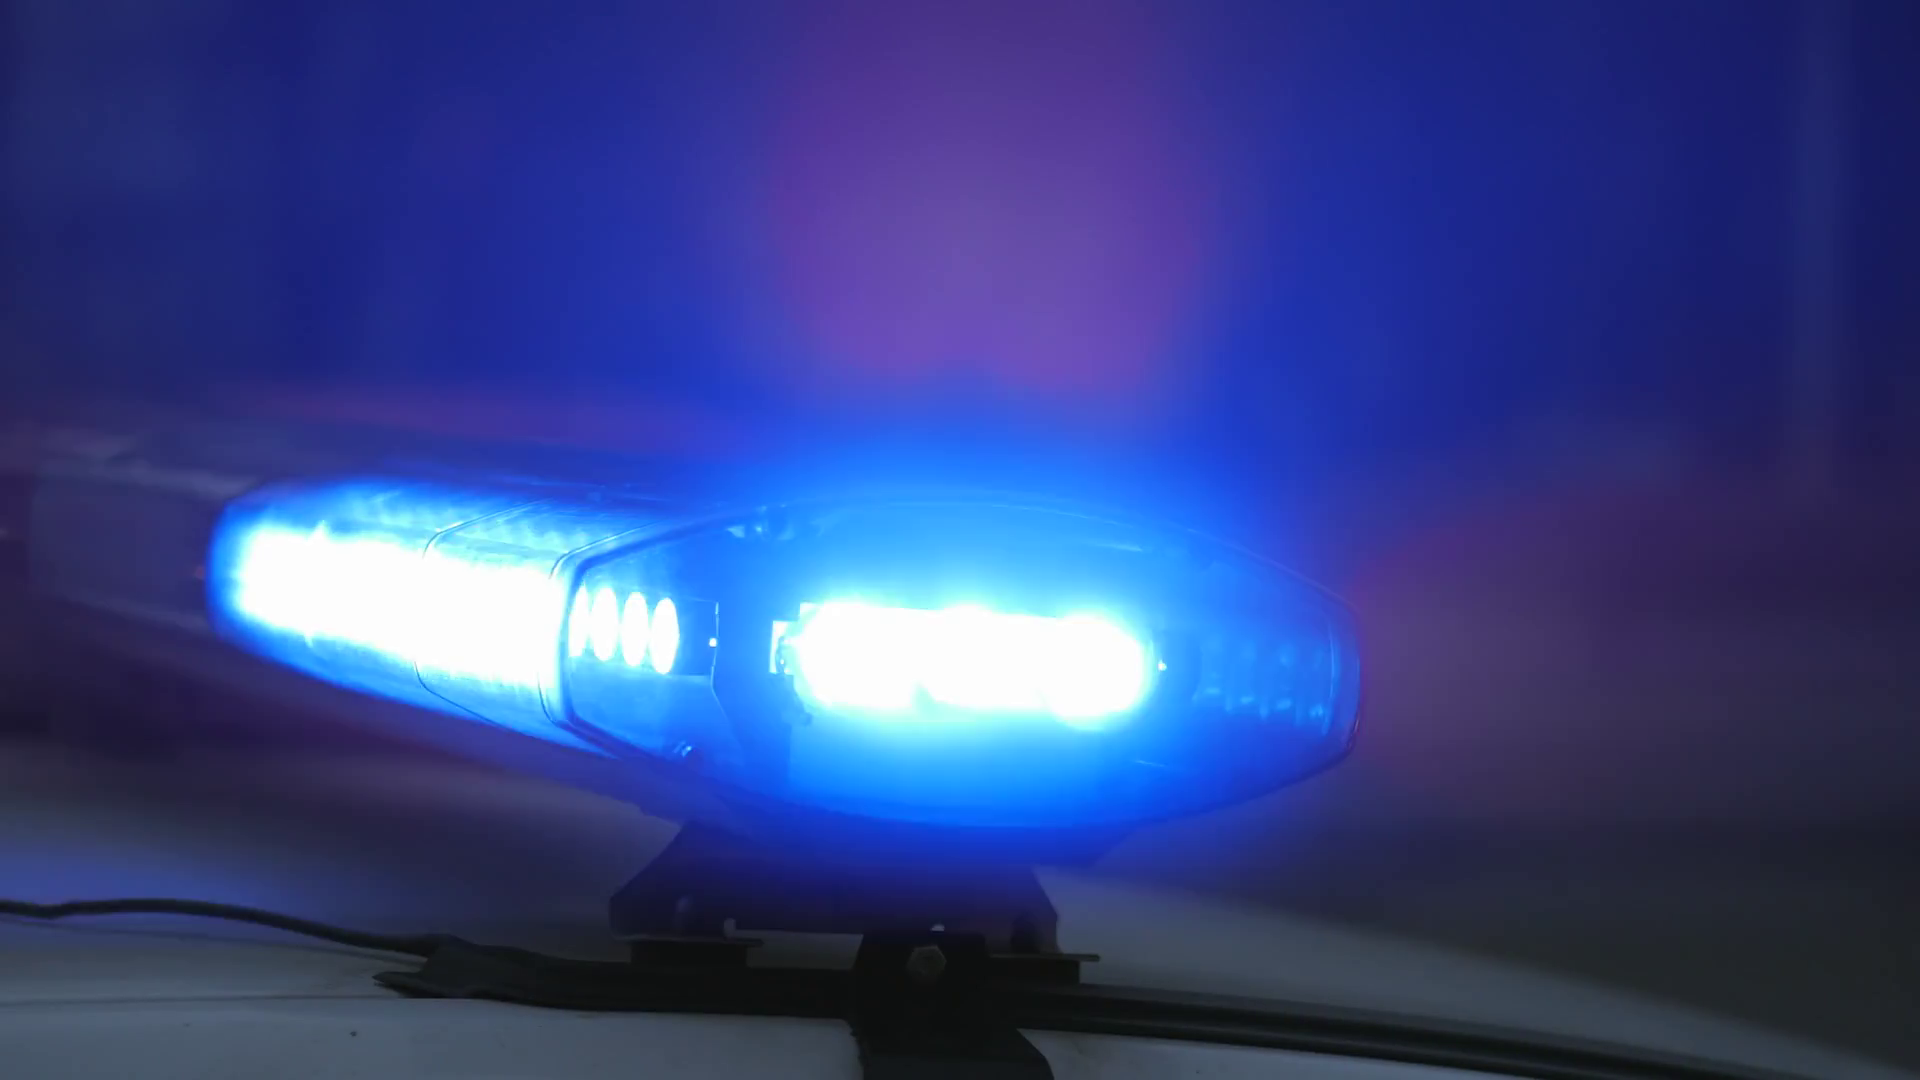 close-up view of emergency services flashing light